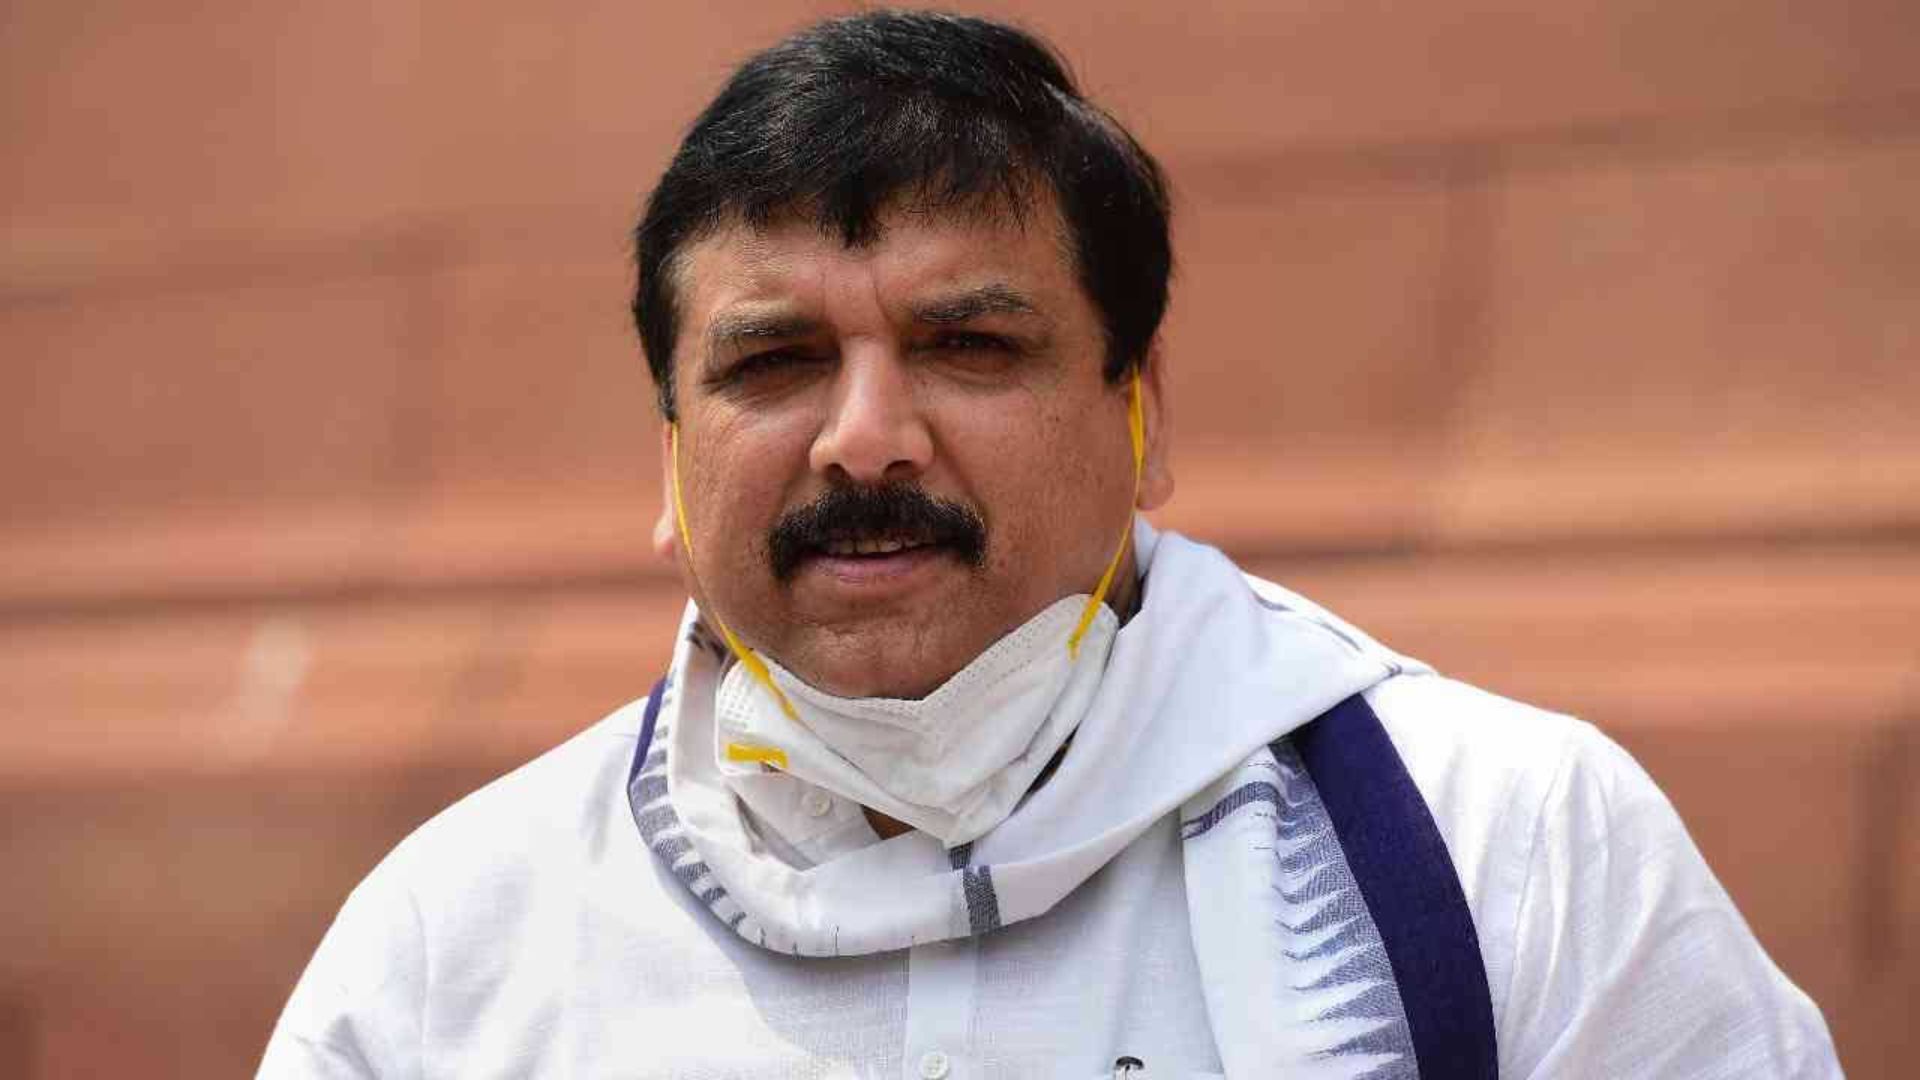 Excise Case: Sanjay Singh AAP leader moves bail petition in trial court